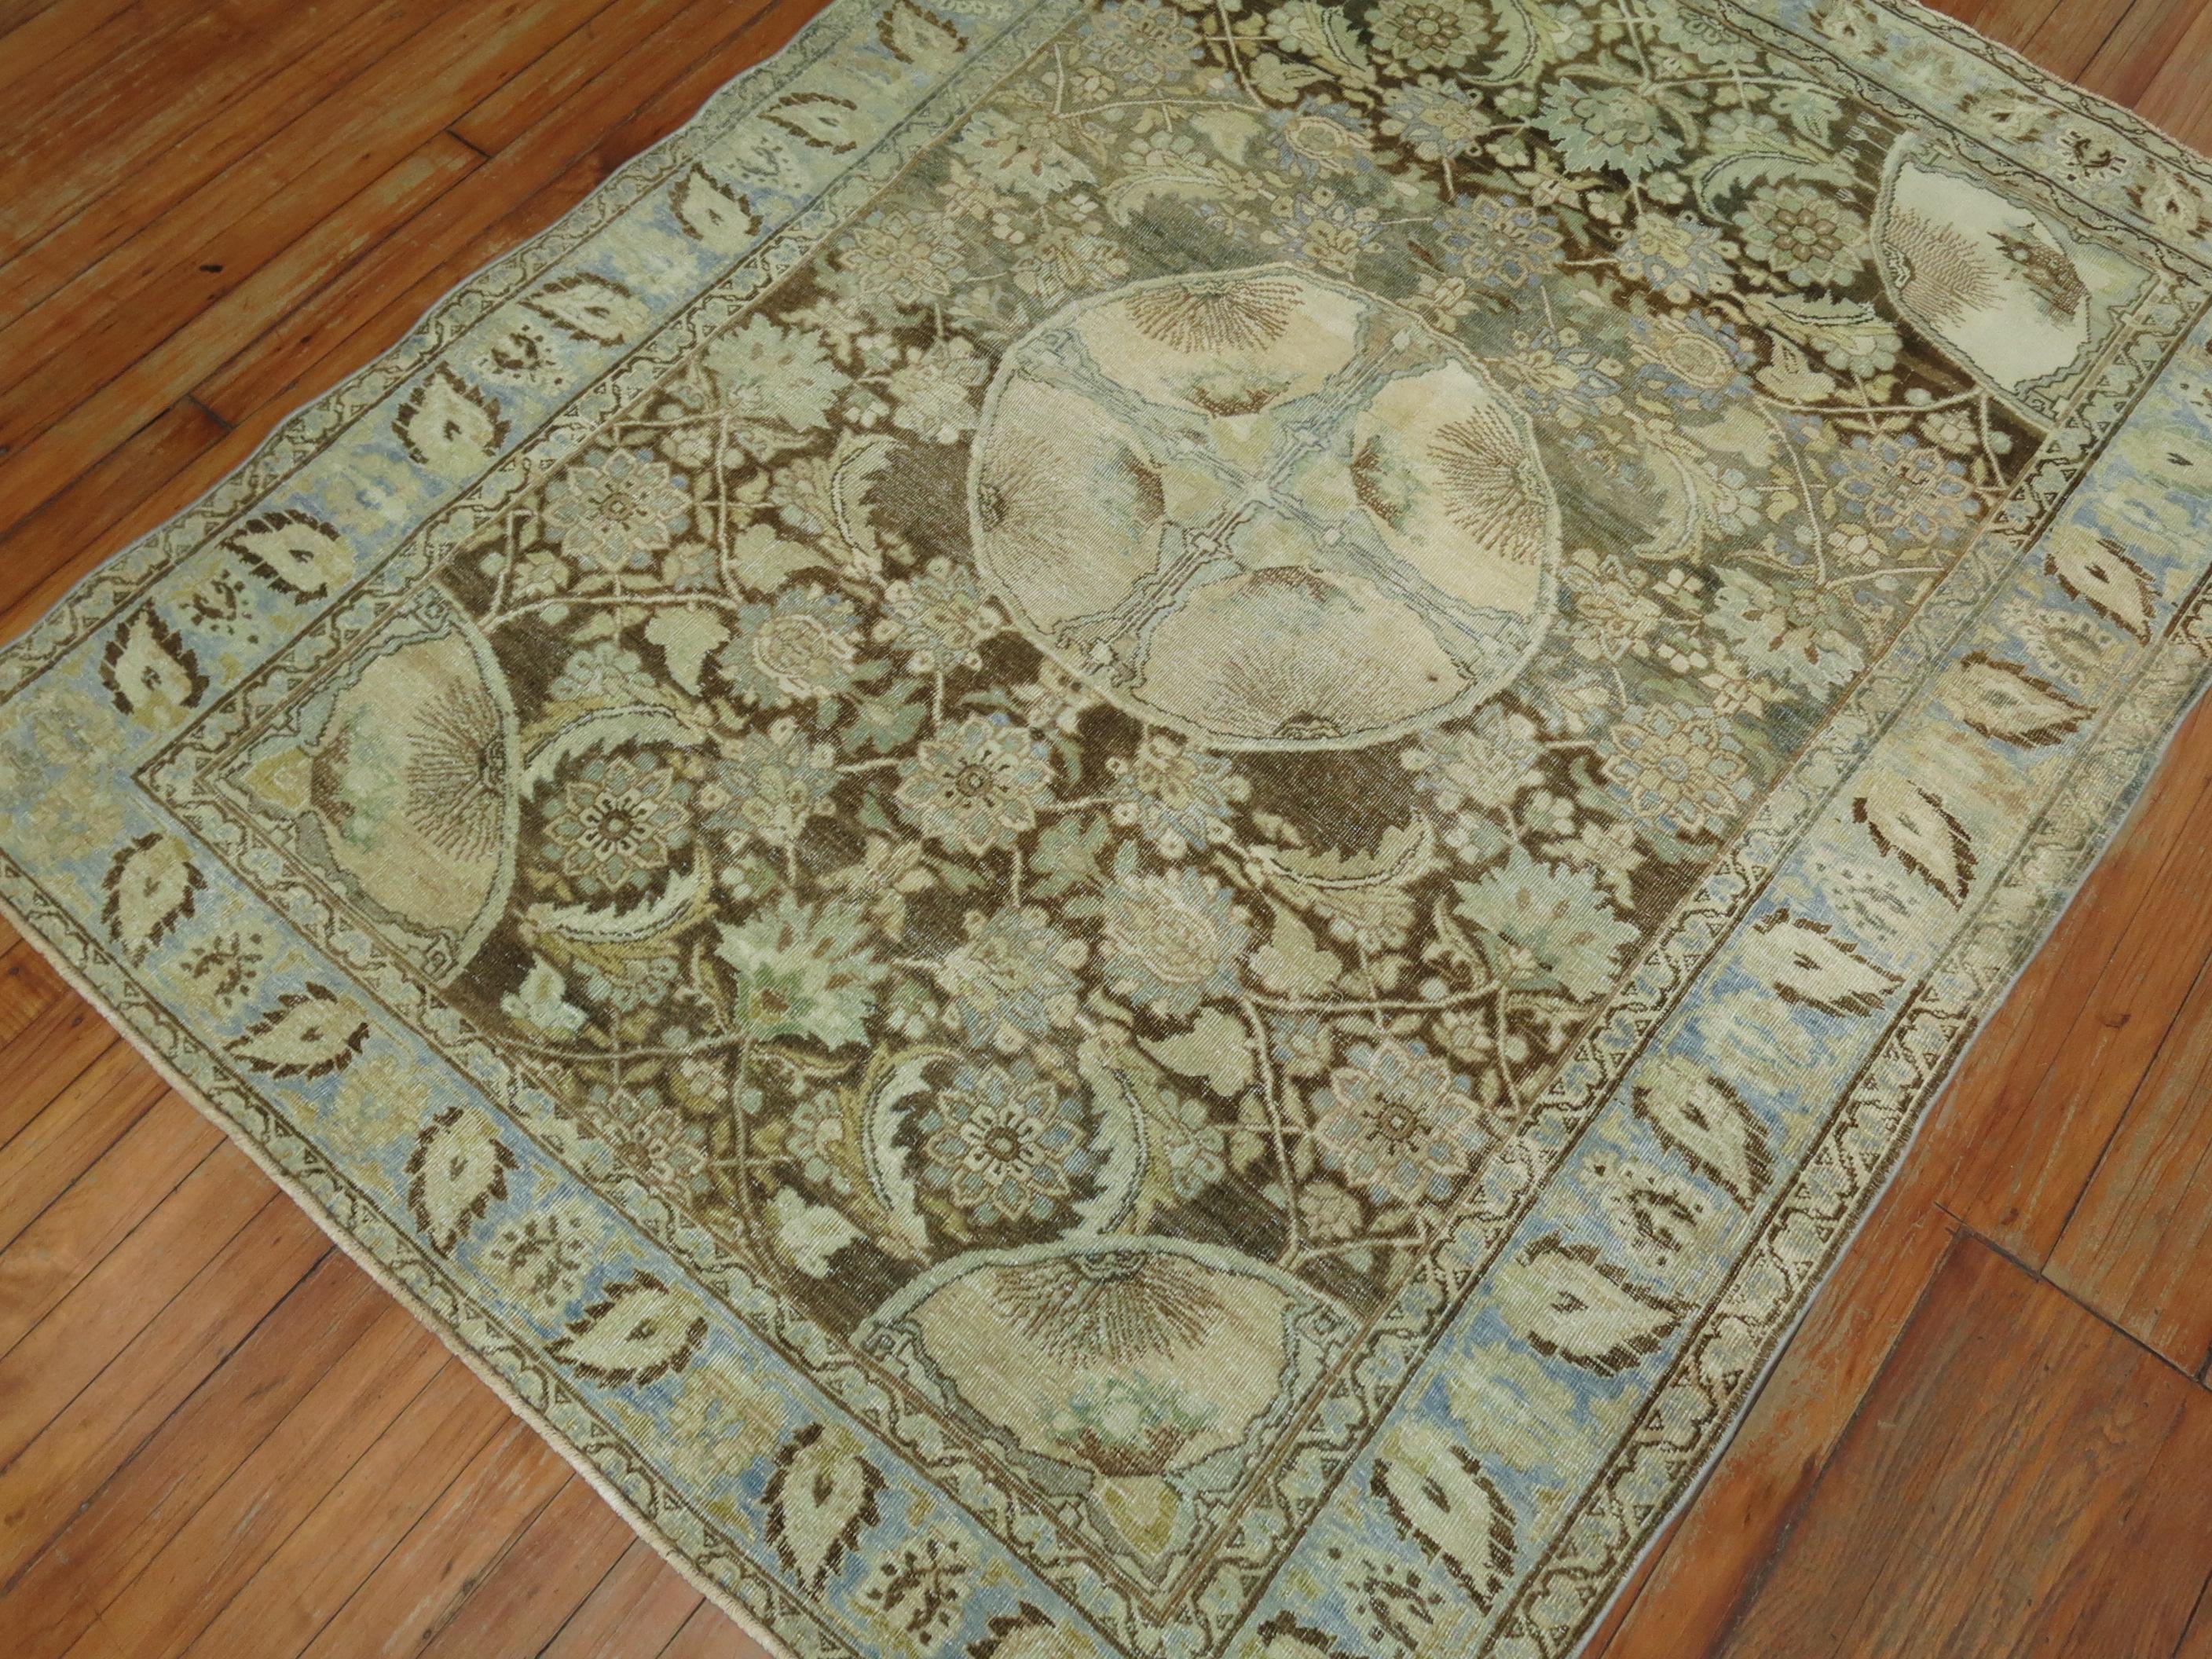 Eclectic Persian Blue Green Brown Tabriz Oriental Hand Knotted Rug 2